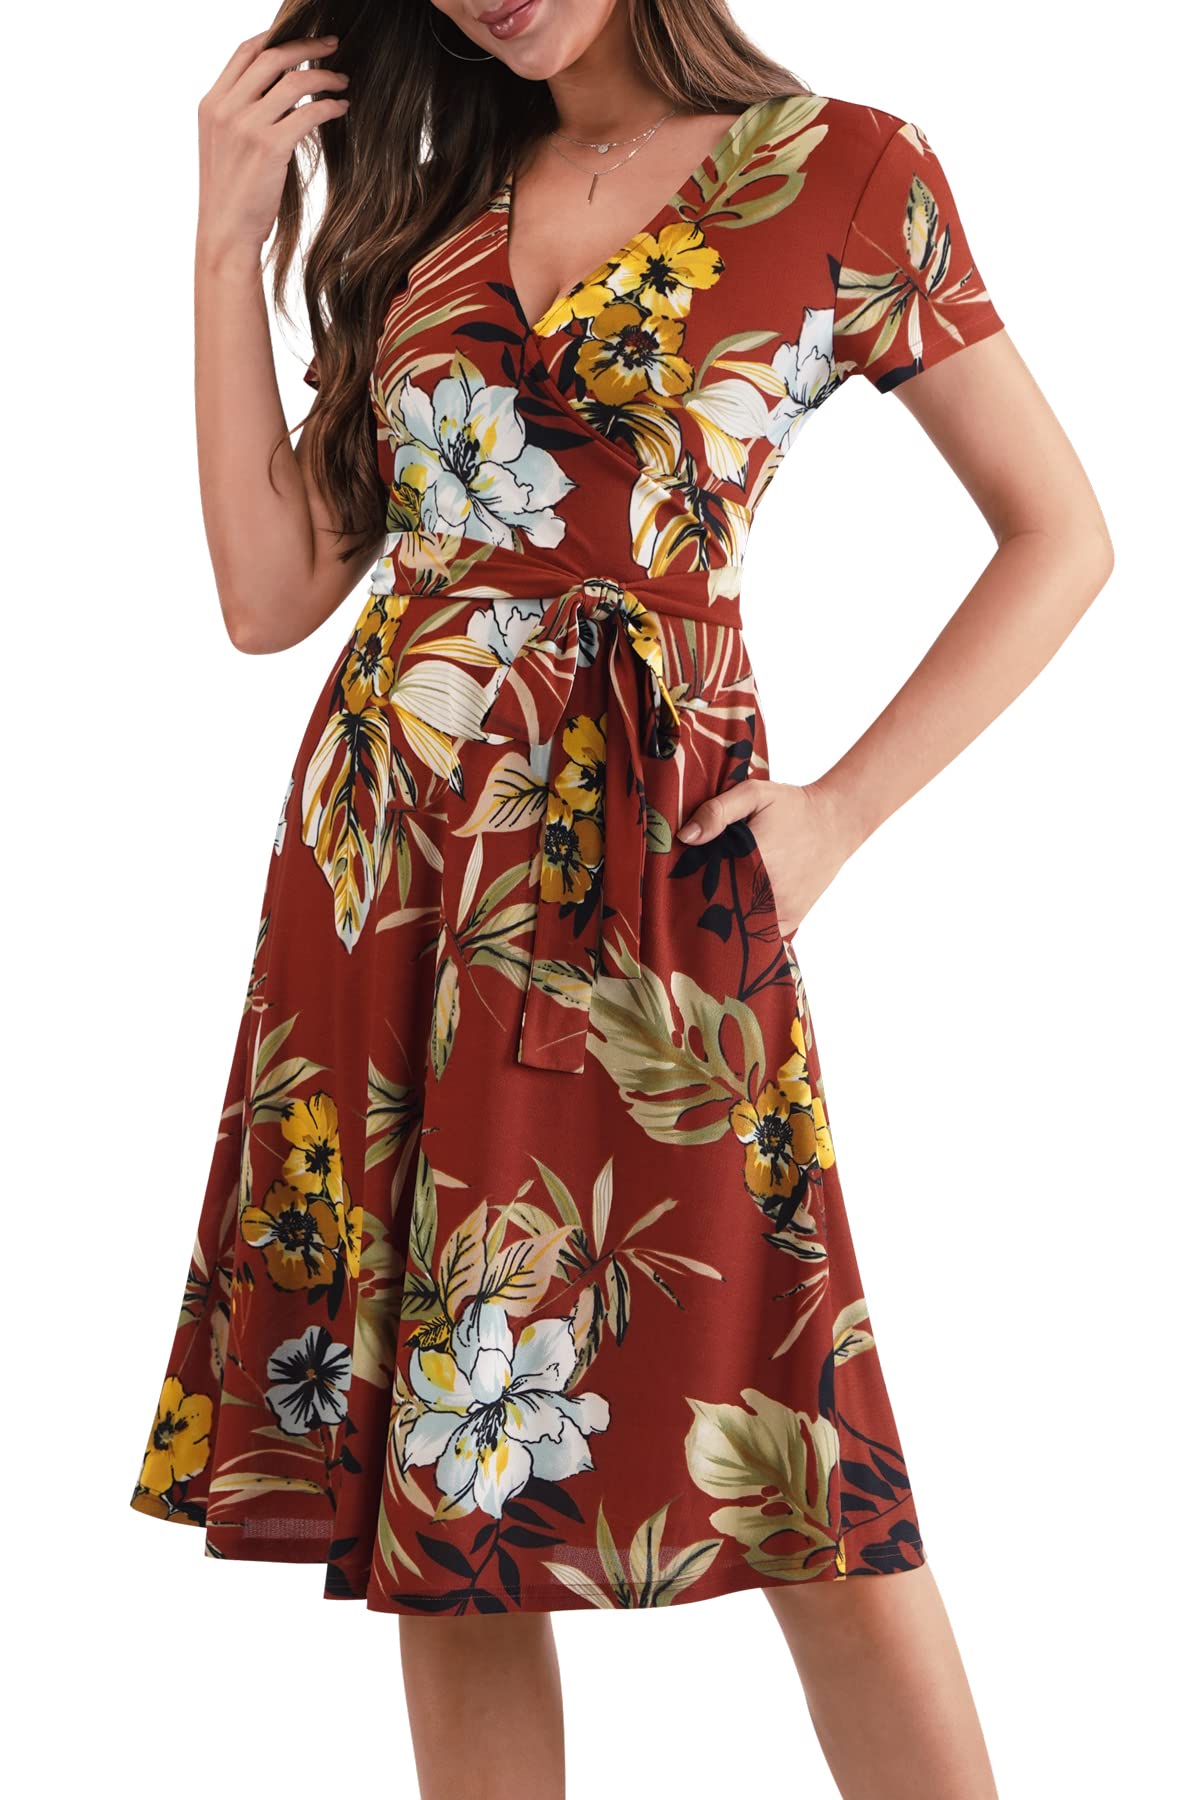 BAISHENGGT Maroon Floral Women's Summer Short Sleeve Cross V Neck Casual Tie Waist Swing Beach Party Dress with Pockets